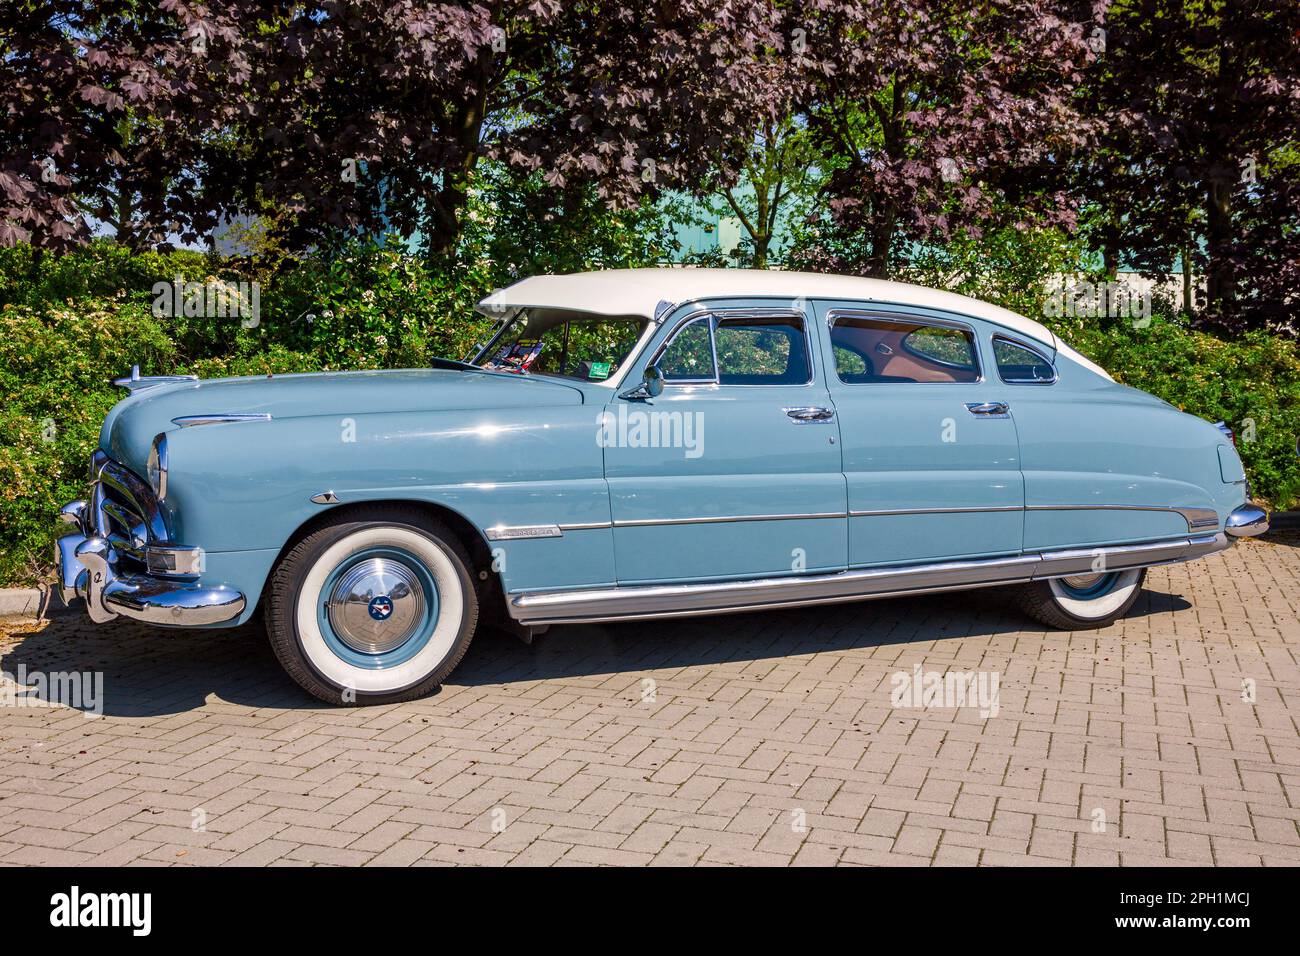 1951 Hudson Commodore 6 classic car on the parking lot. Rosmalen, The Netherlands - May 8, 2016 Stock Photo